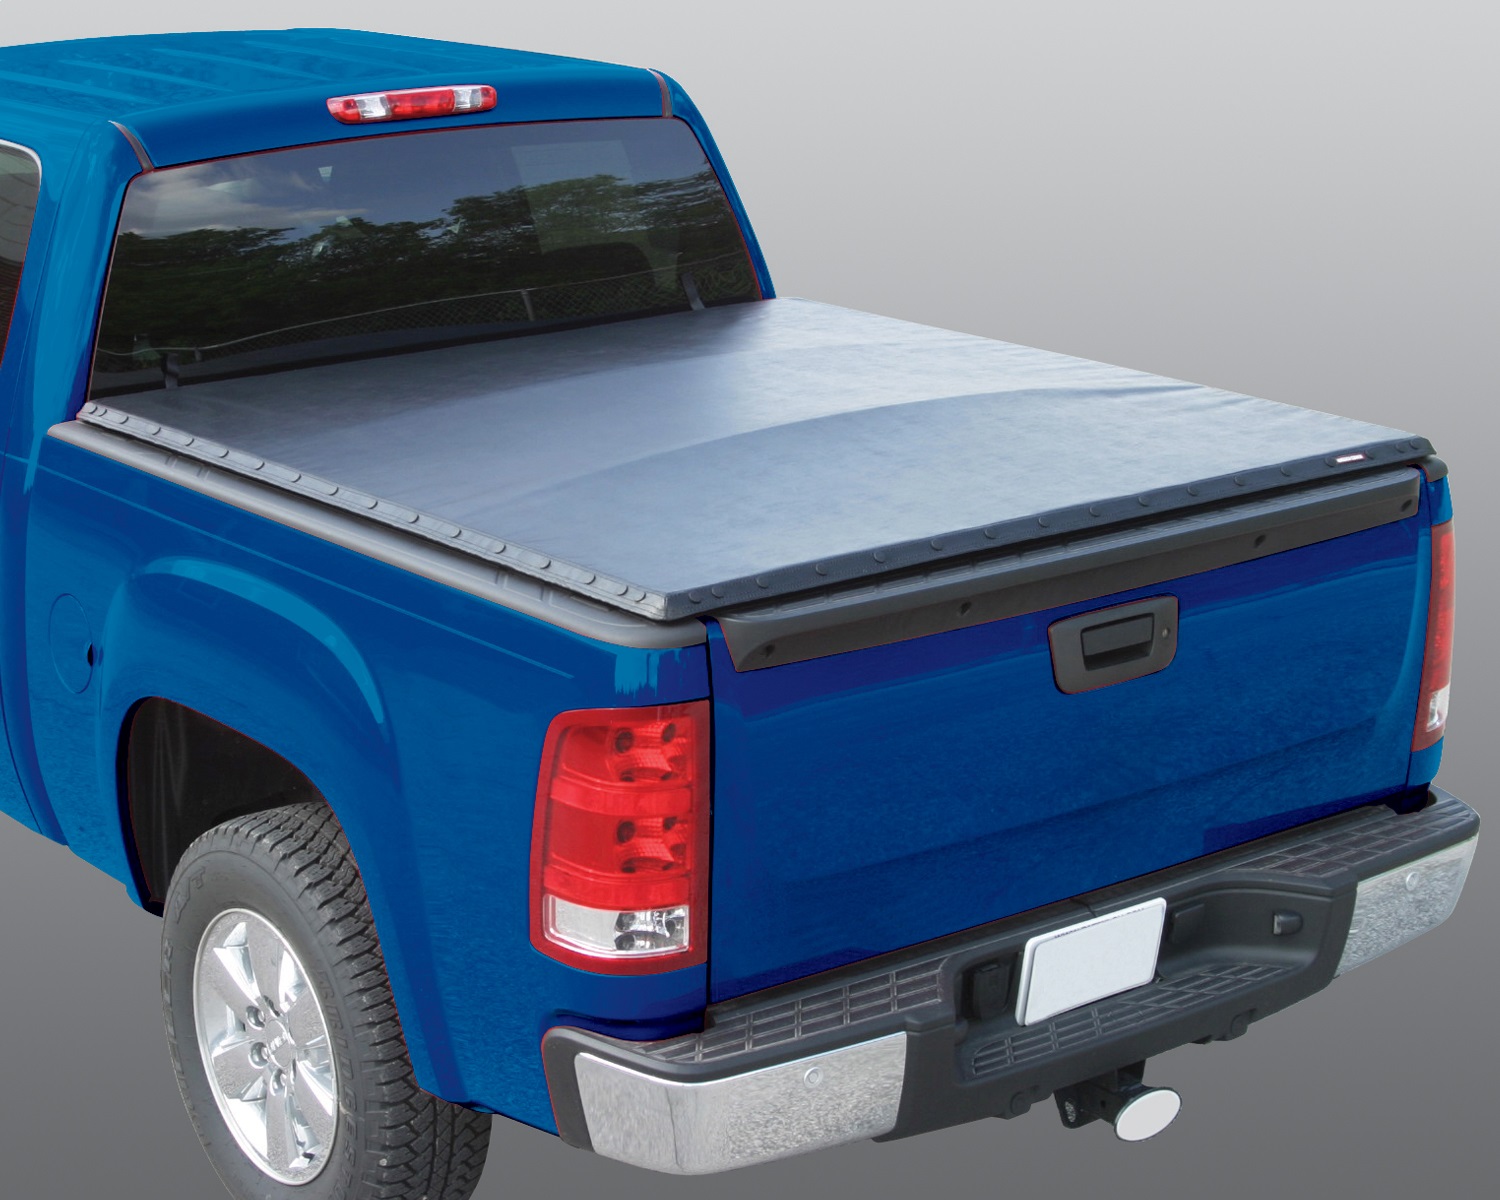 Rugged Liner Rugged Liner SN-T695 Rugged Cover; Tonneau Cover Fits 89-04 Pickup Tacoma